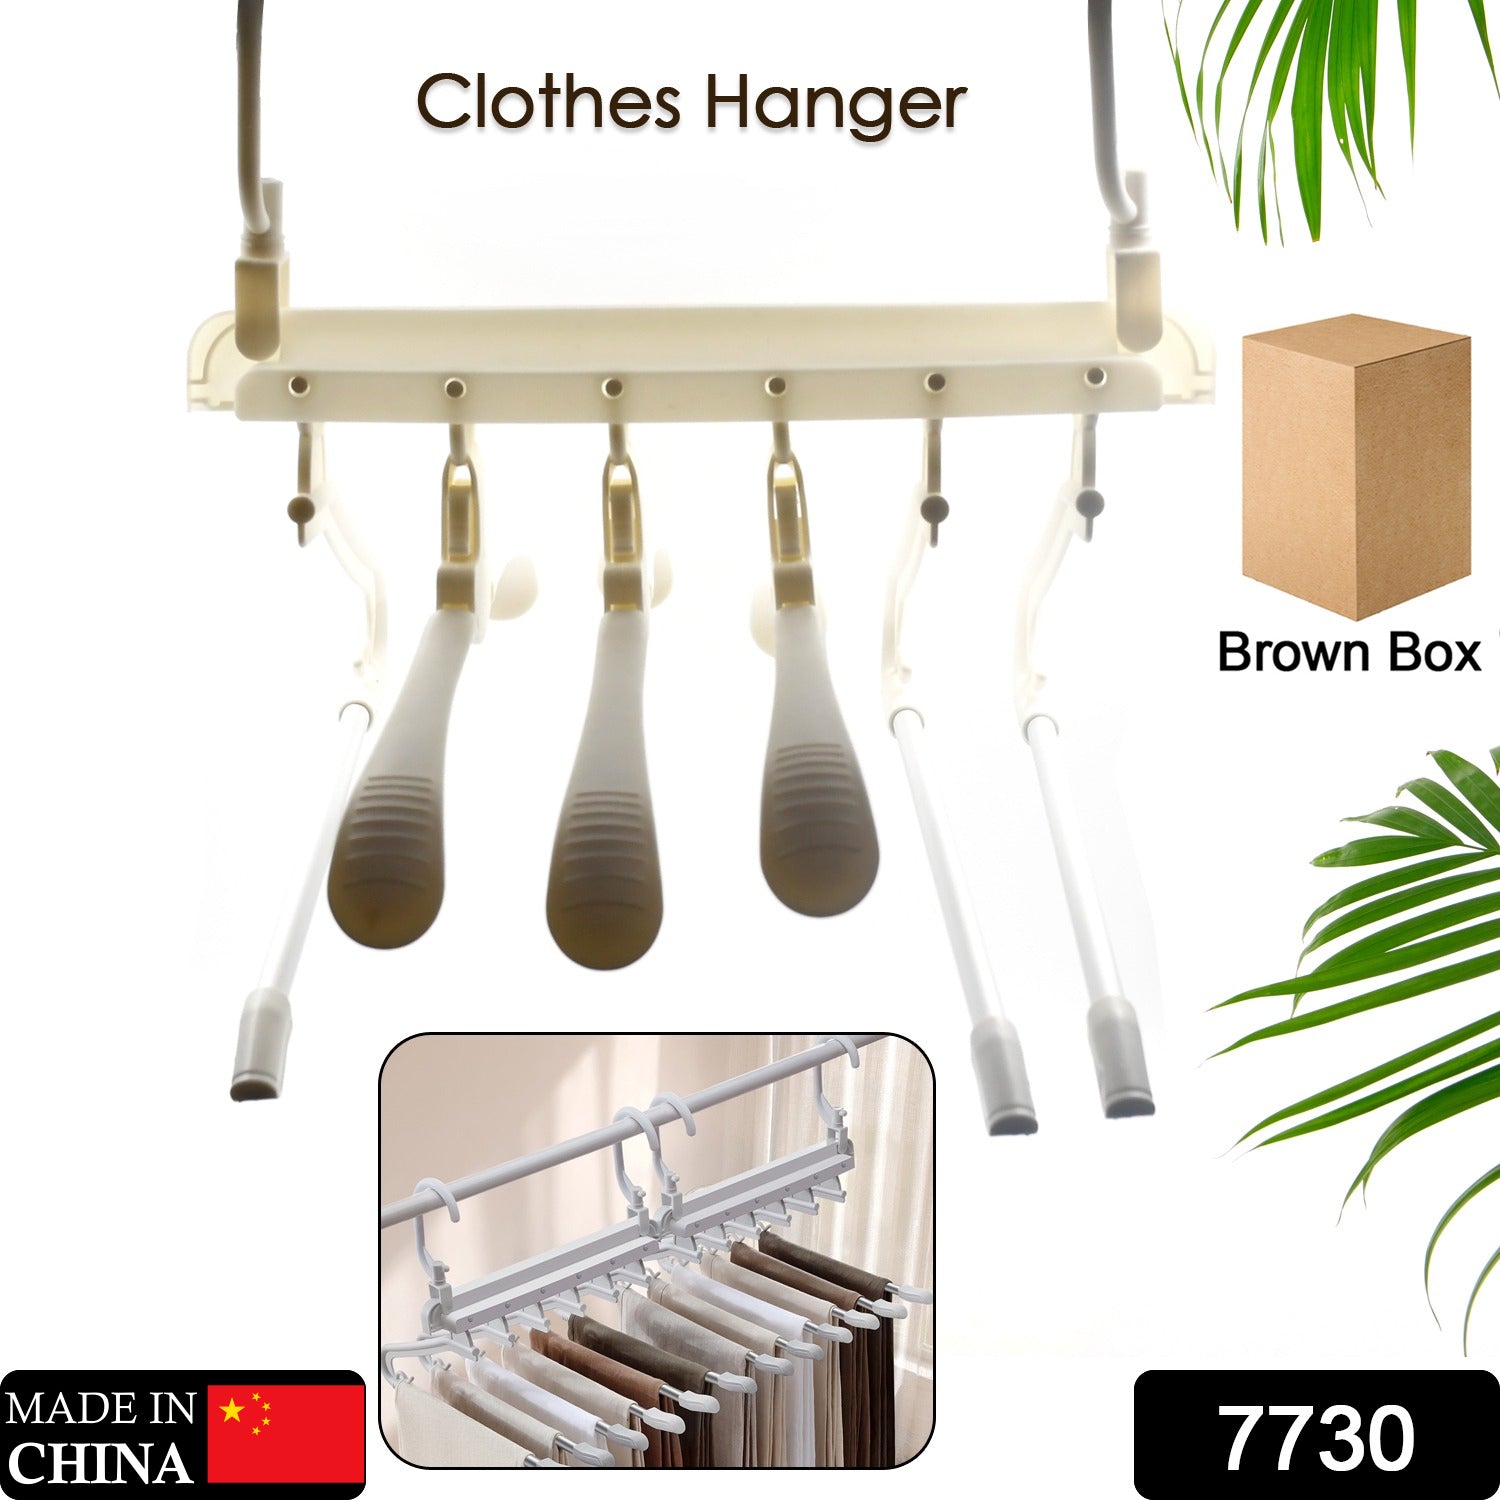 7730 Cloth Hanger 6 in 1 Multi-Layer Hanging Mass Pants Rack Stainless Steel Pants Hangers Folding Storage Rack Space Saver Storage for Trousers Scarf Tie Belt